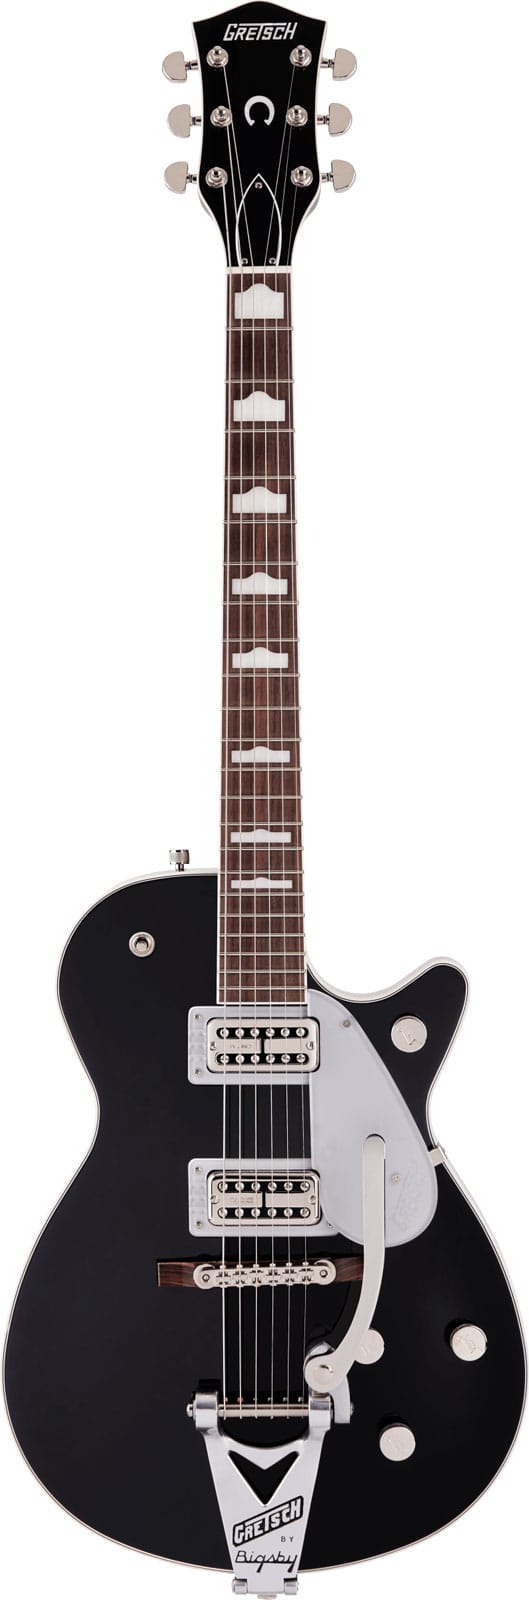 GRETSCH GUITARS G6128T-89 VINTAGE SELECT '89 DUO JET WITH BIGSBY RW, BLACK